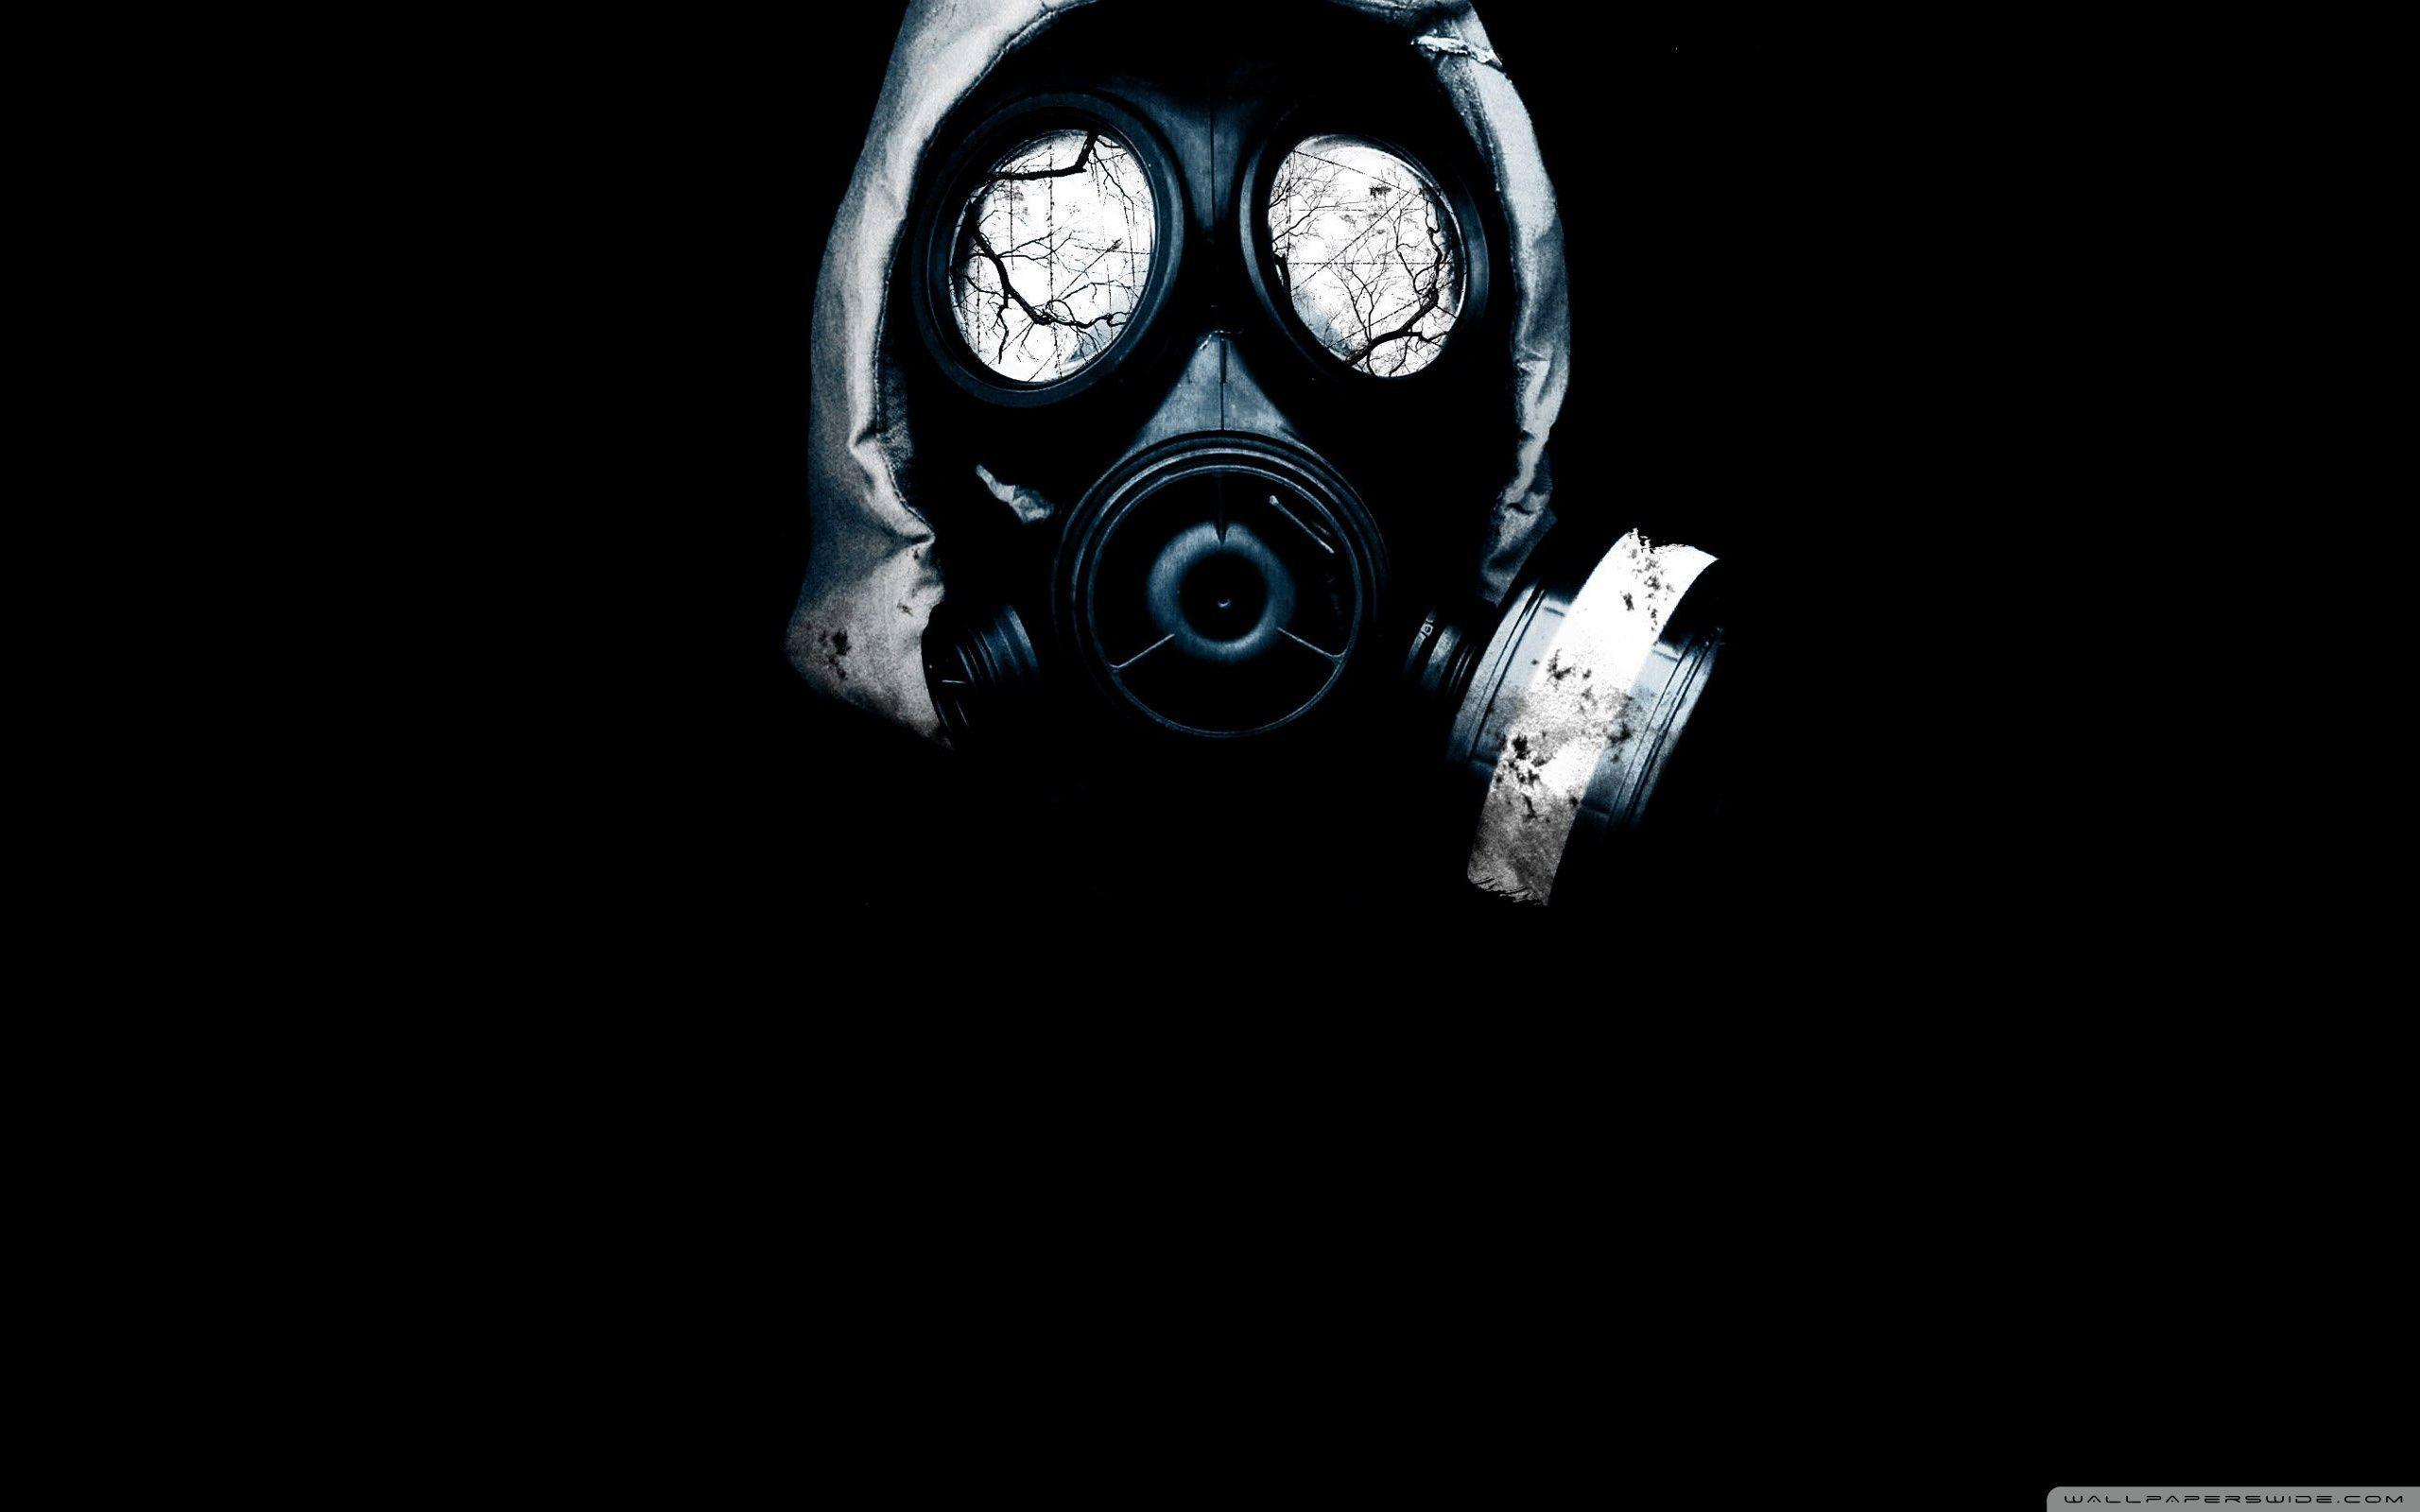 Dubstep Gas Mask Wallpapers